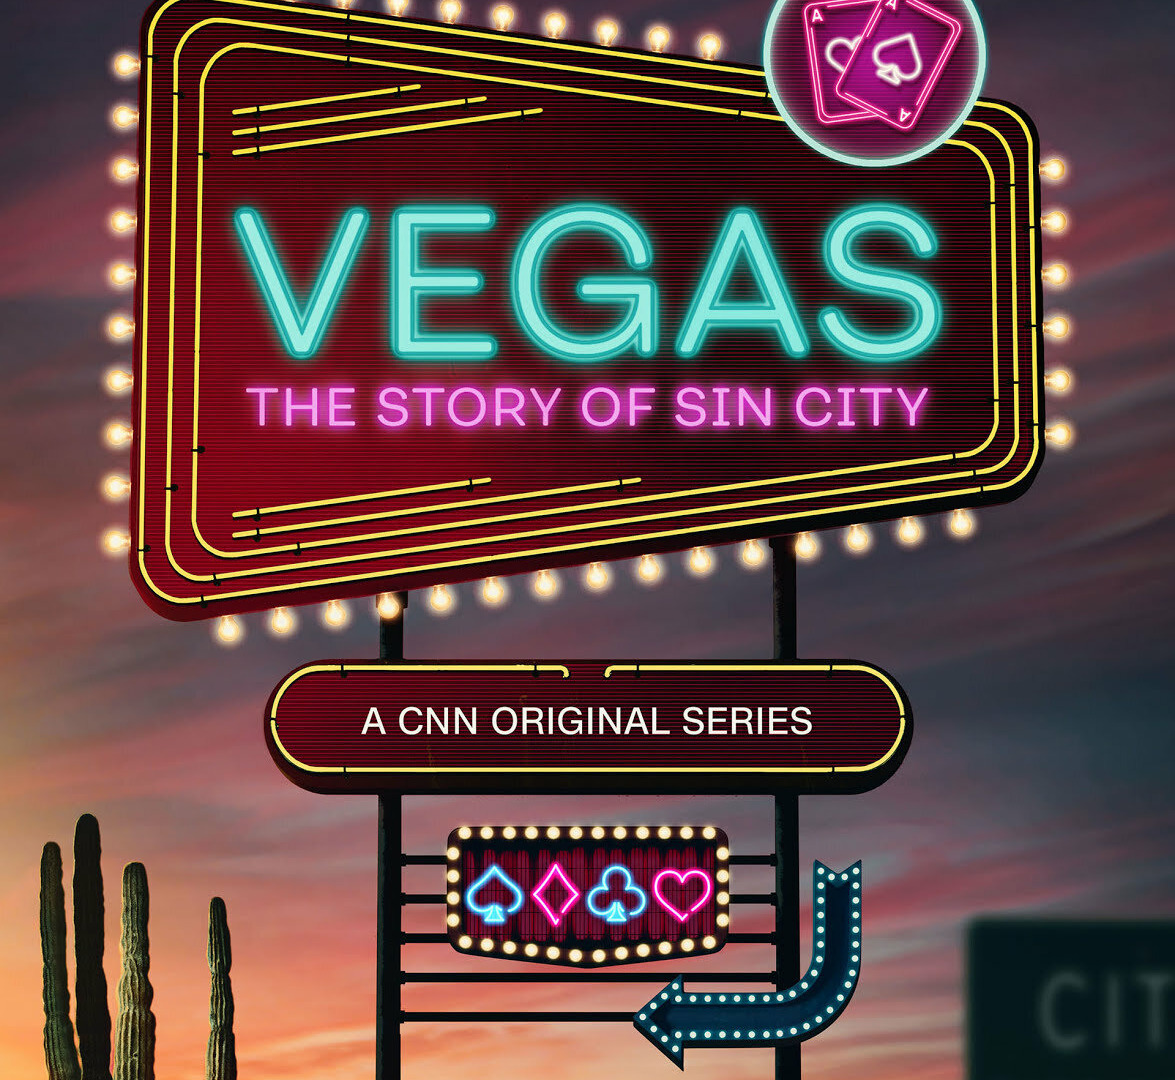 Show Vegas: The Story of Sin City